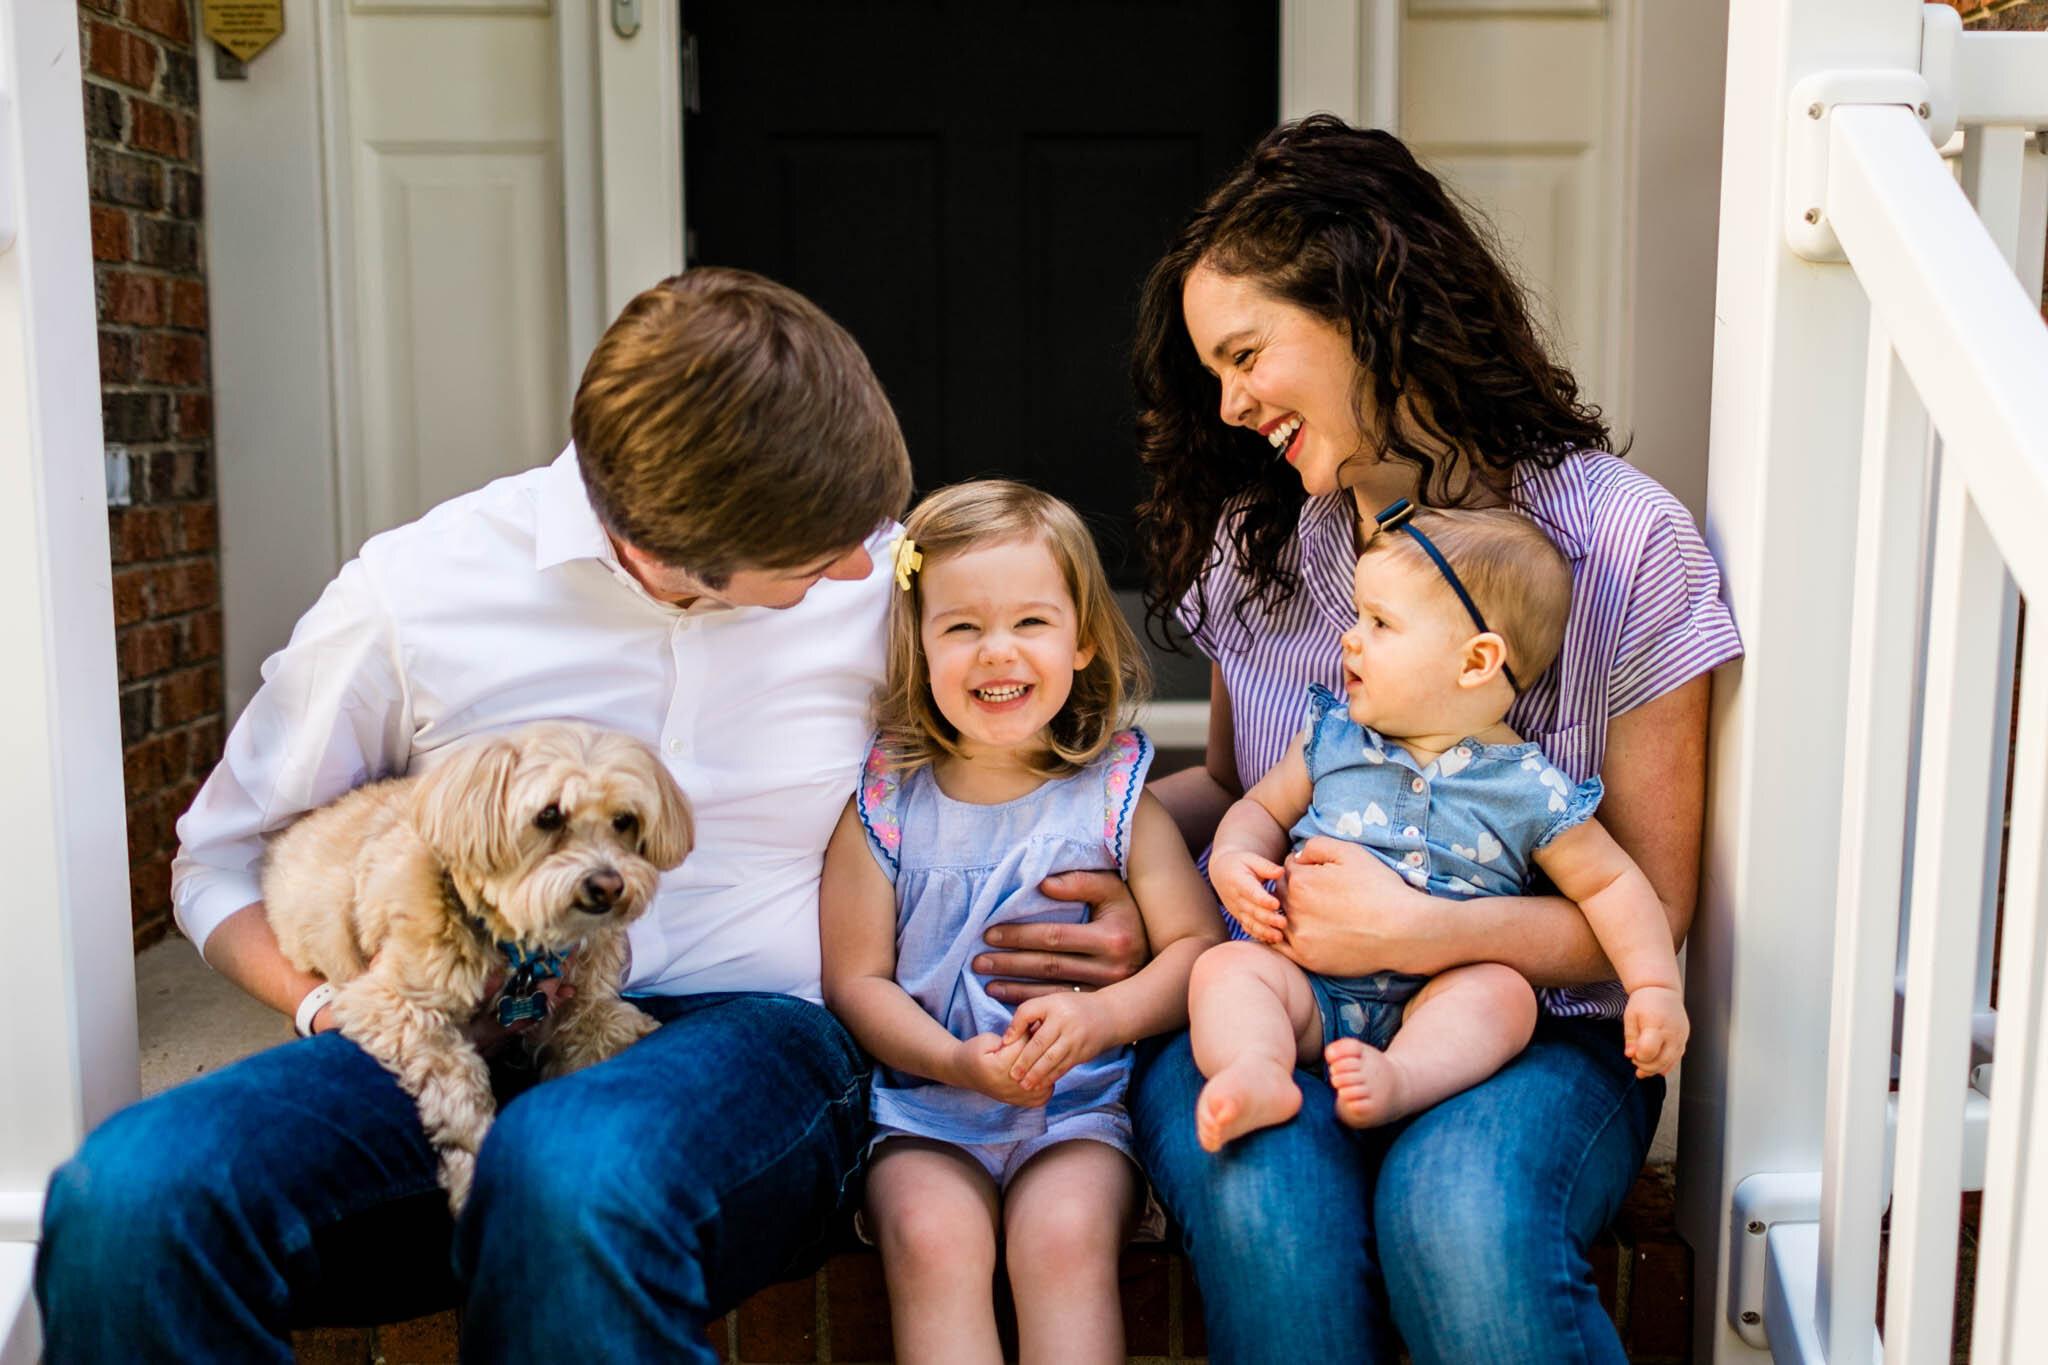 Raleigh Family Photographer | By G. Lin Photography | Porch portrait of family laughing together